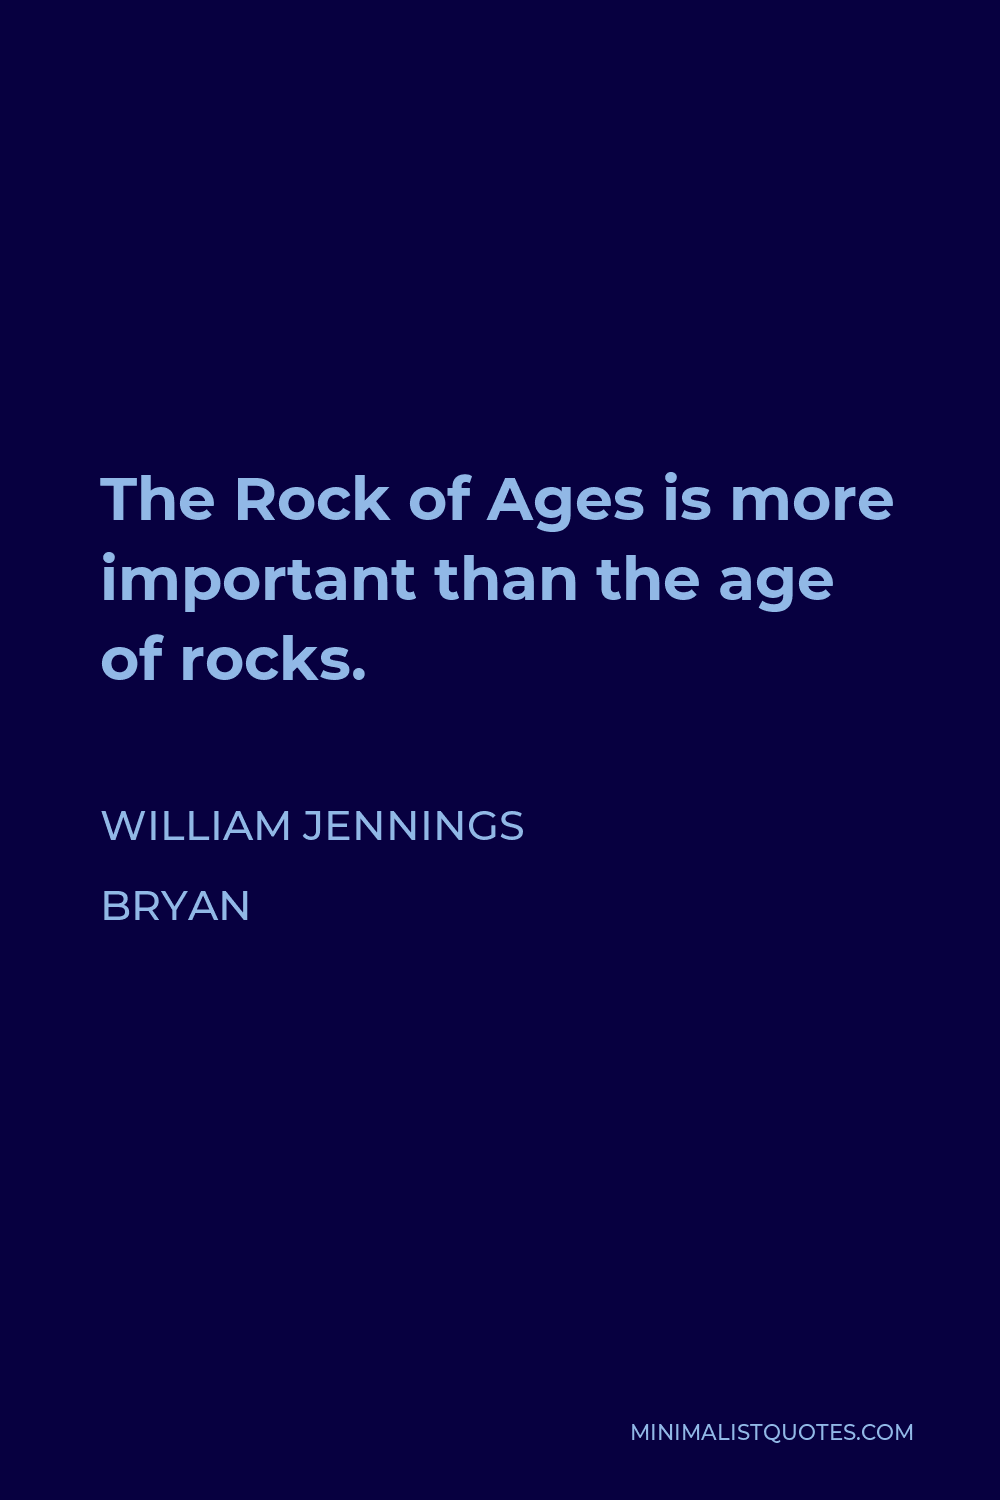 William Jennings Bryan Quote - The Rock of Ages is more important than the age of rocks.